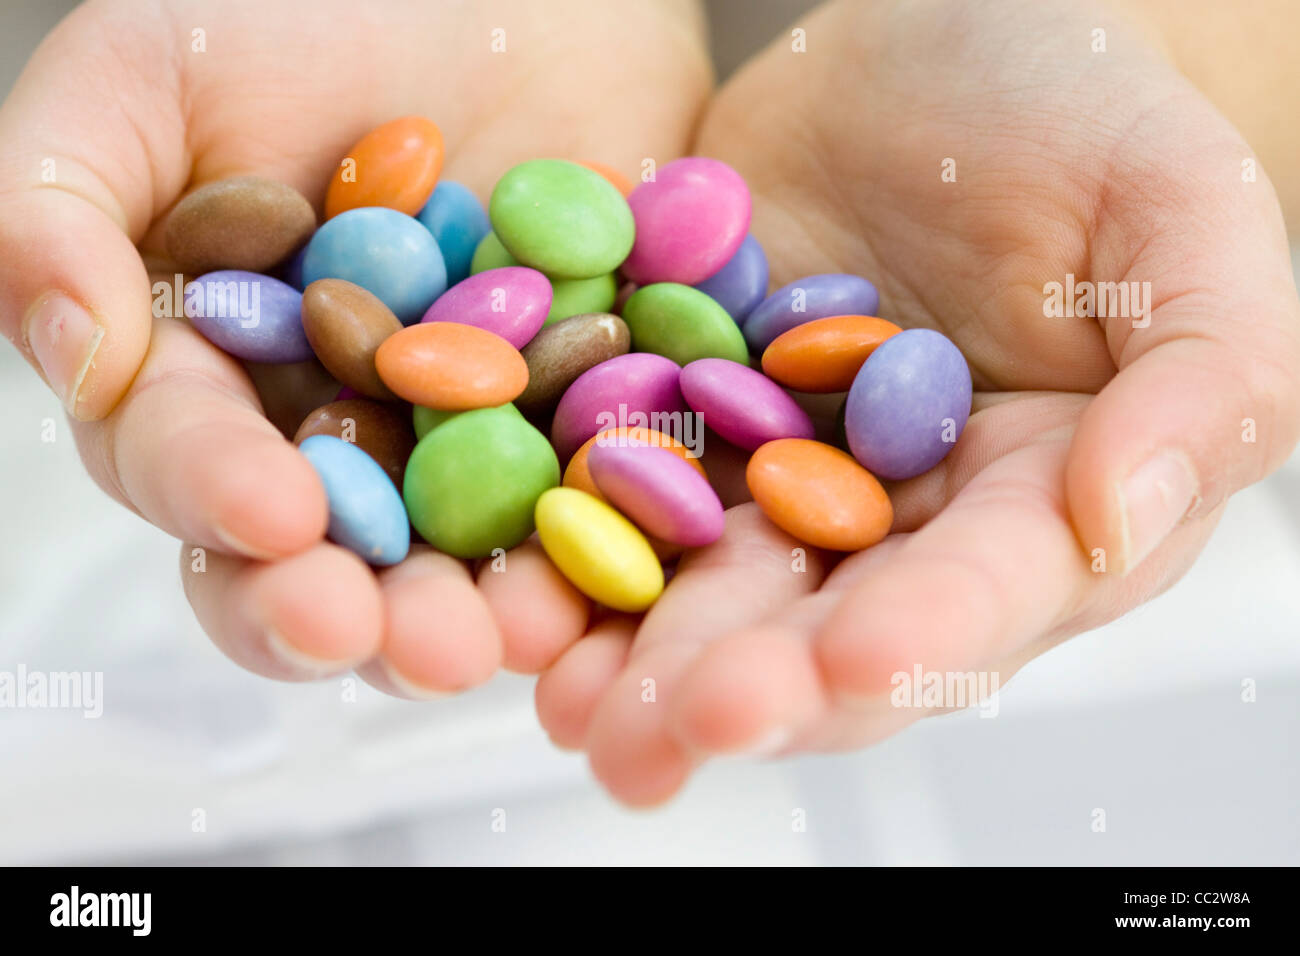 Childs Hands Holding Candy Sweets Stock Photo Alamy